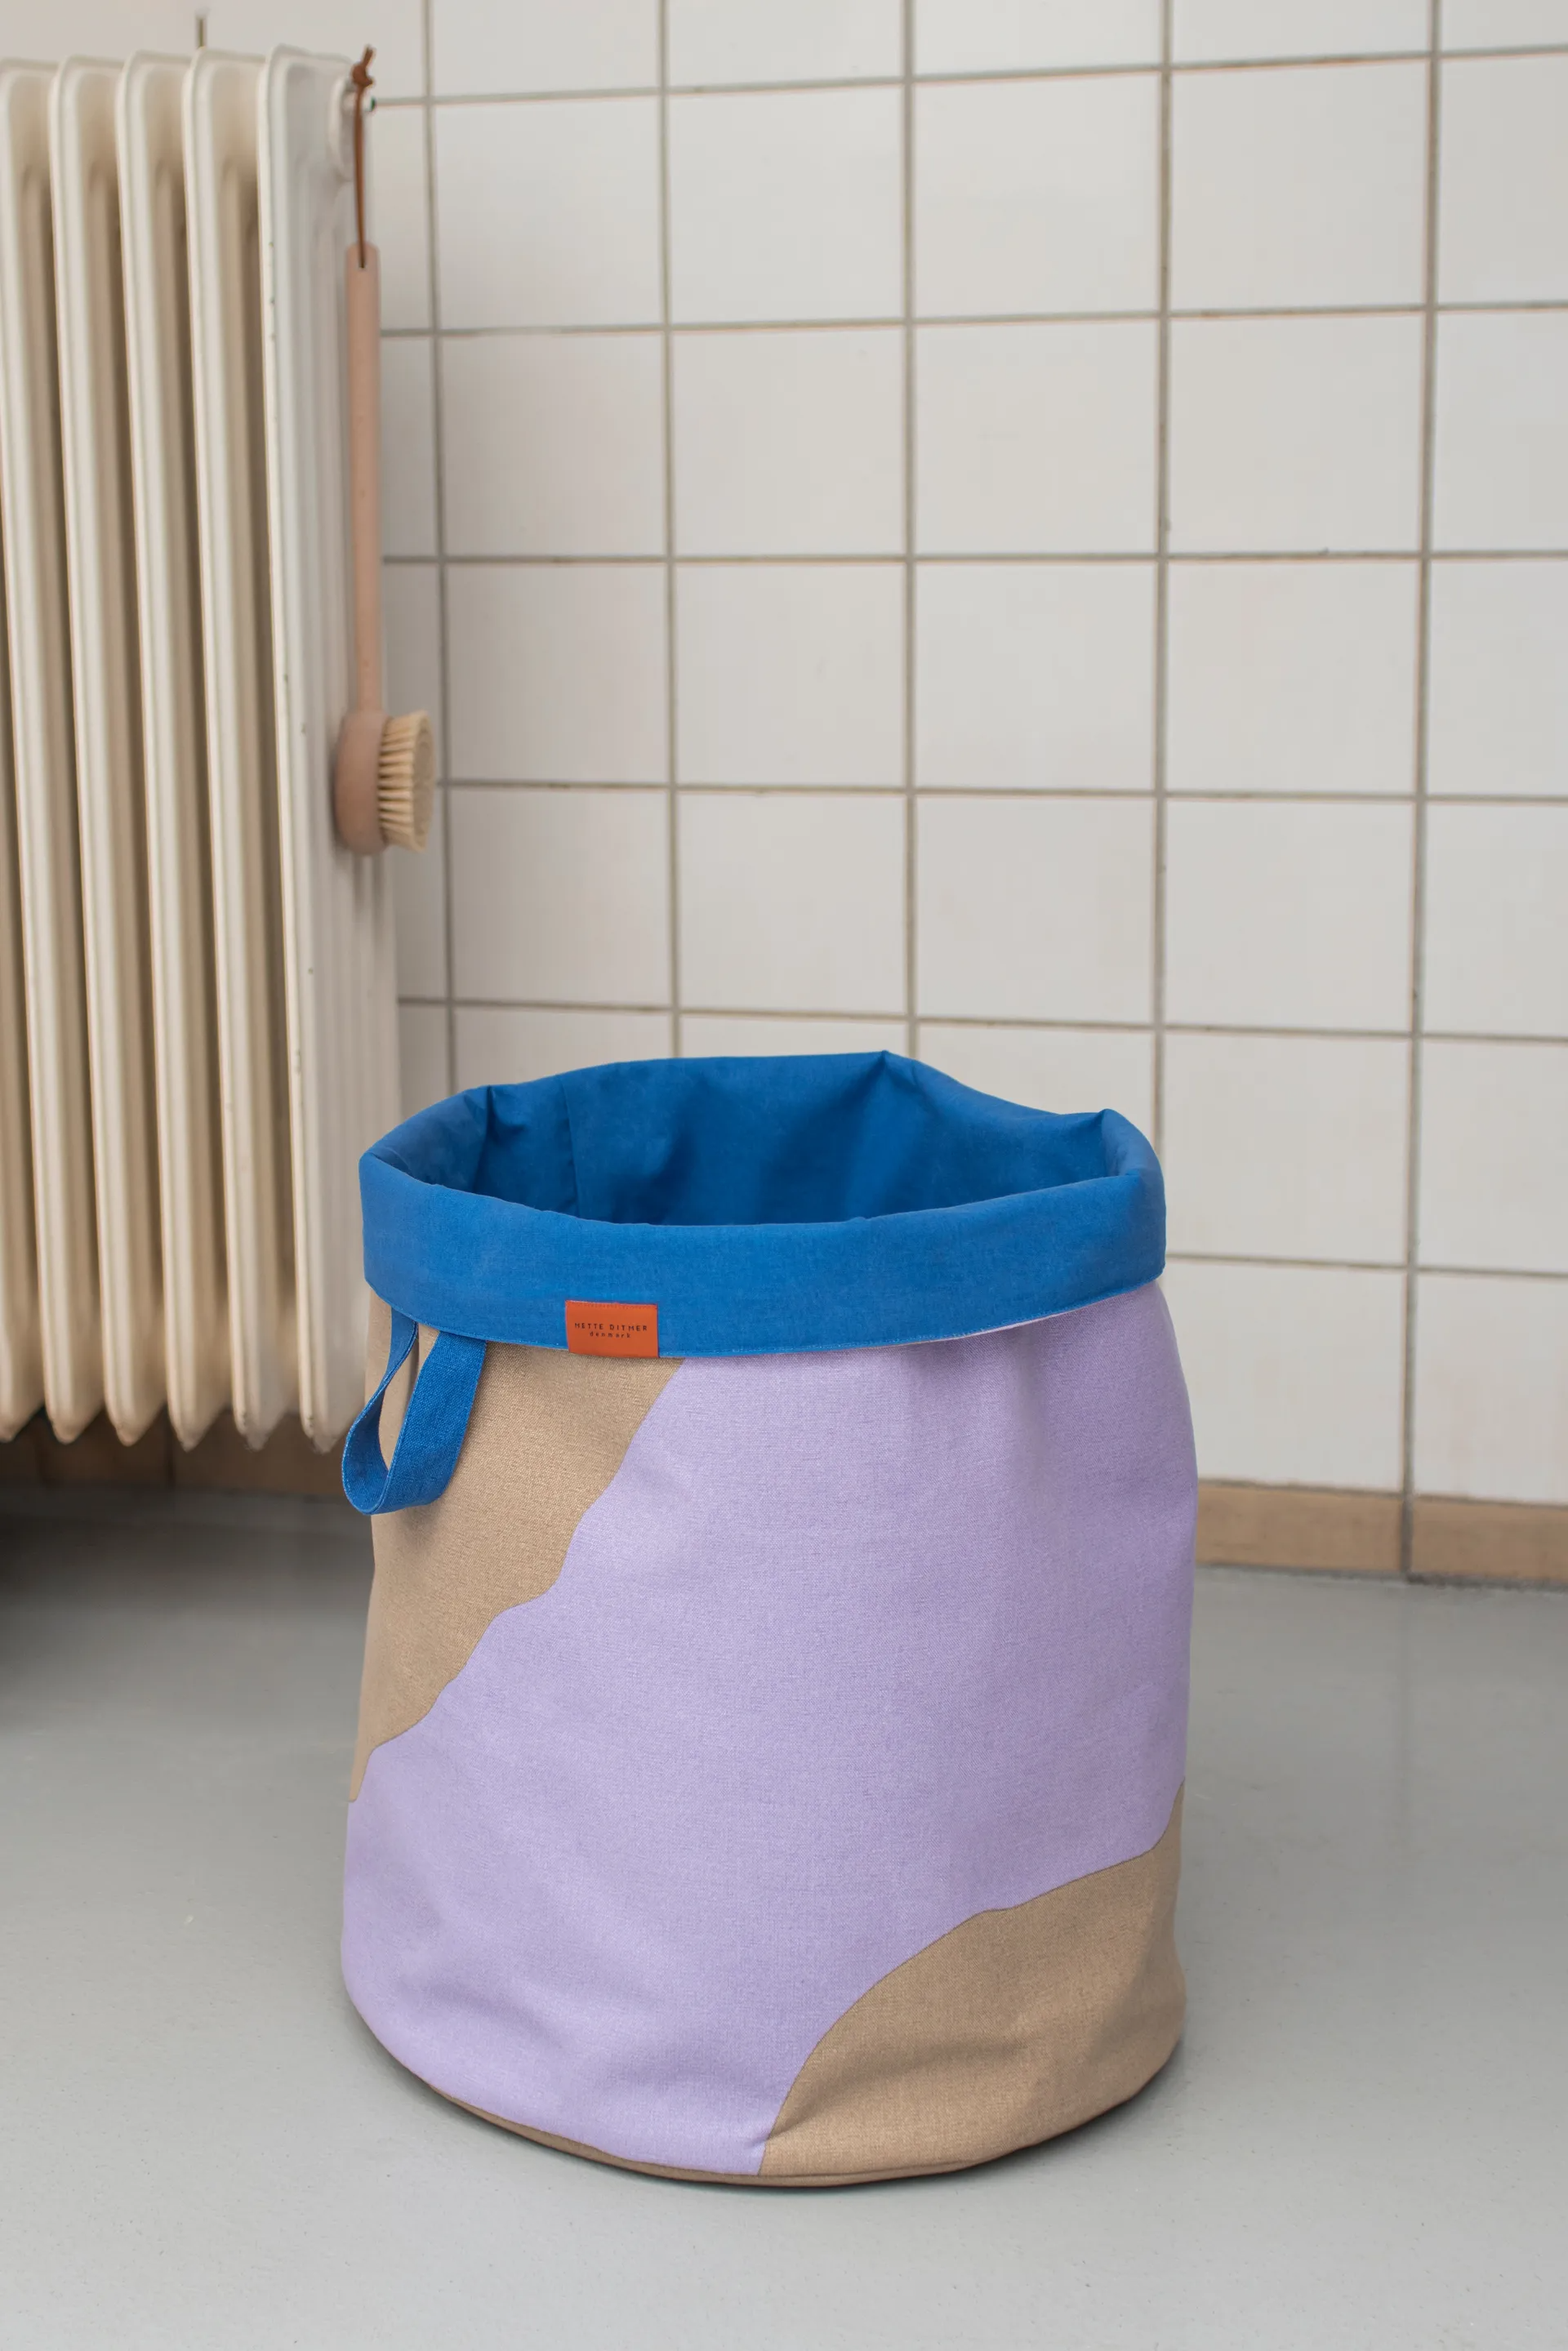 Laundry Baskets Convenient Storage Solutions for Dirty Clothes